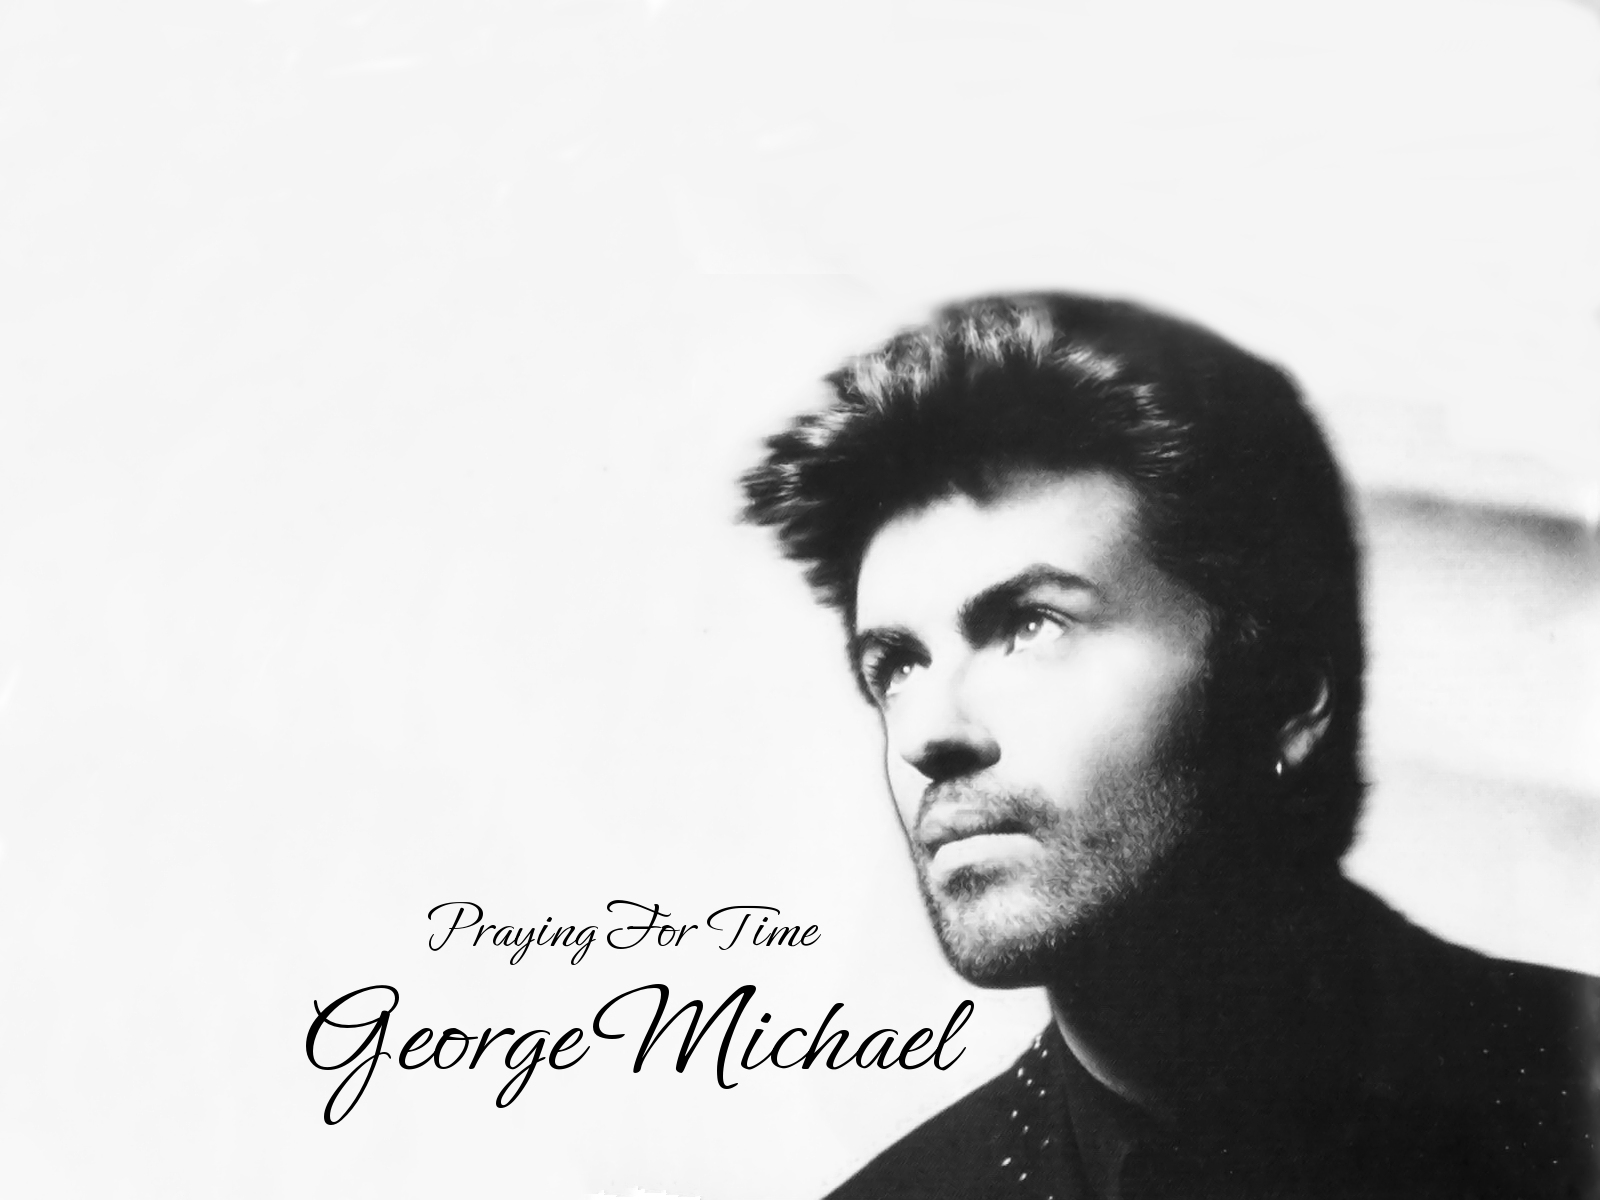 george wallpaper,hair,photograph,hairstyle,album cover,text